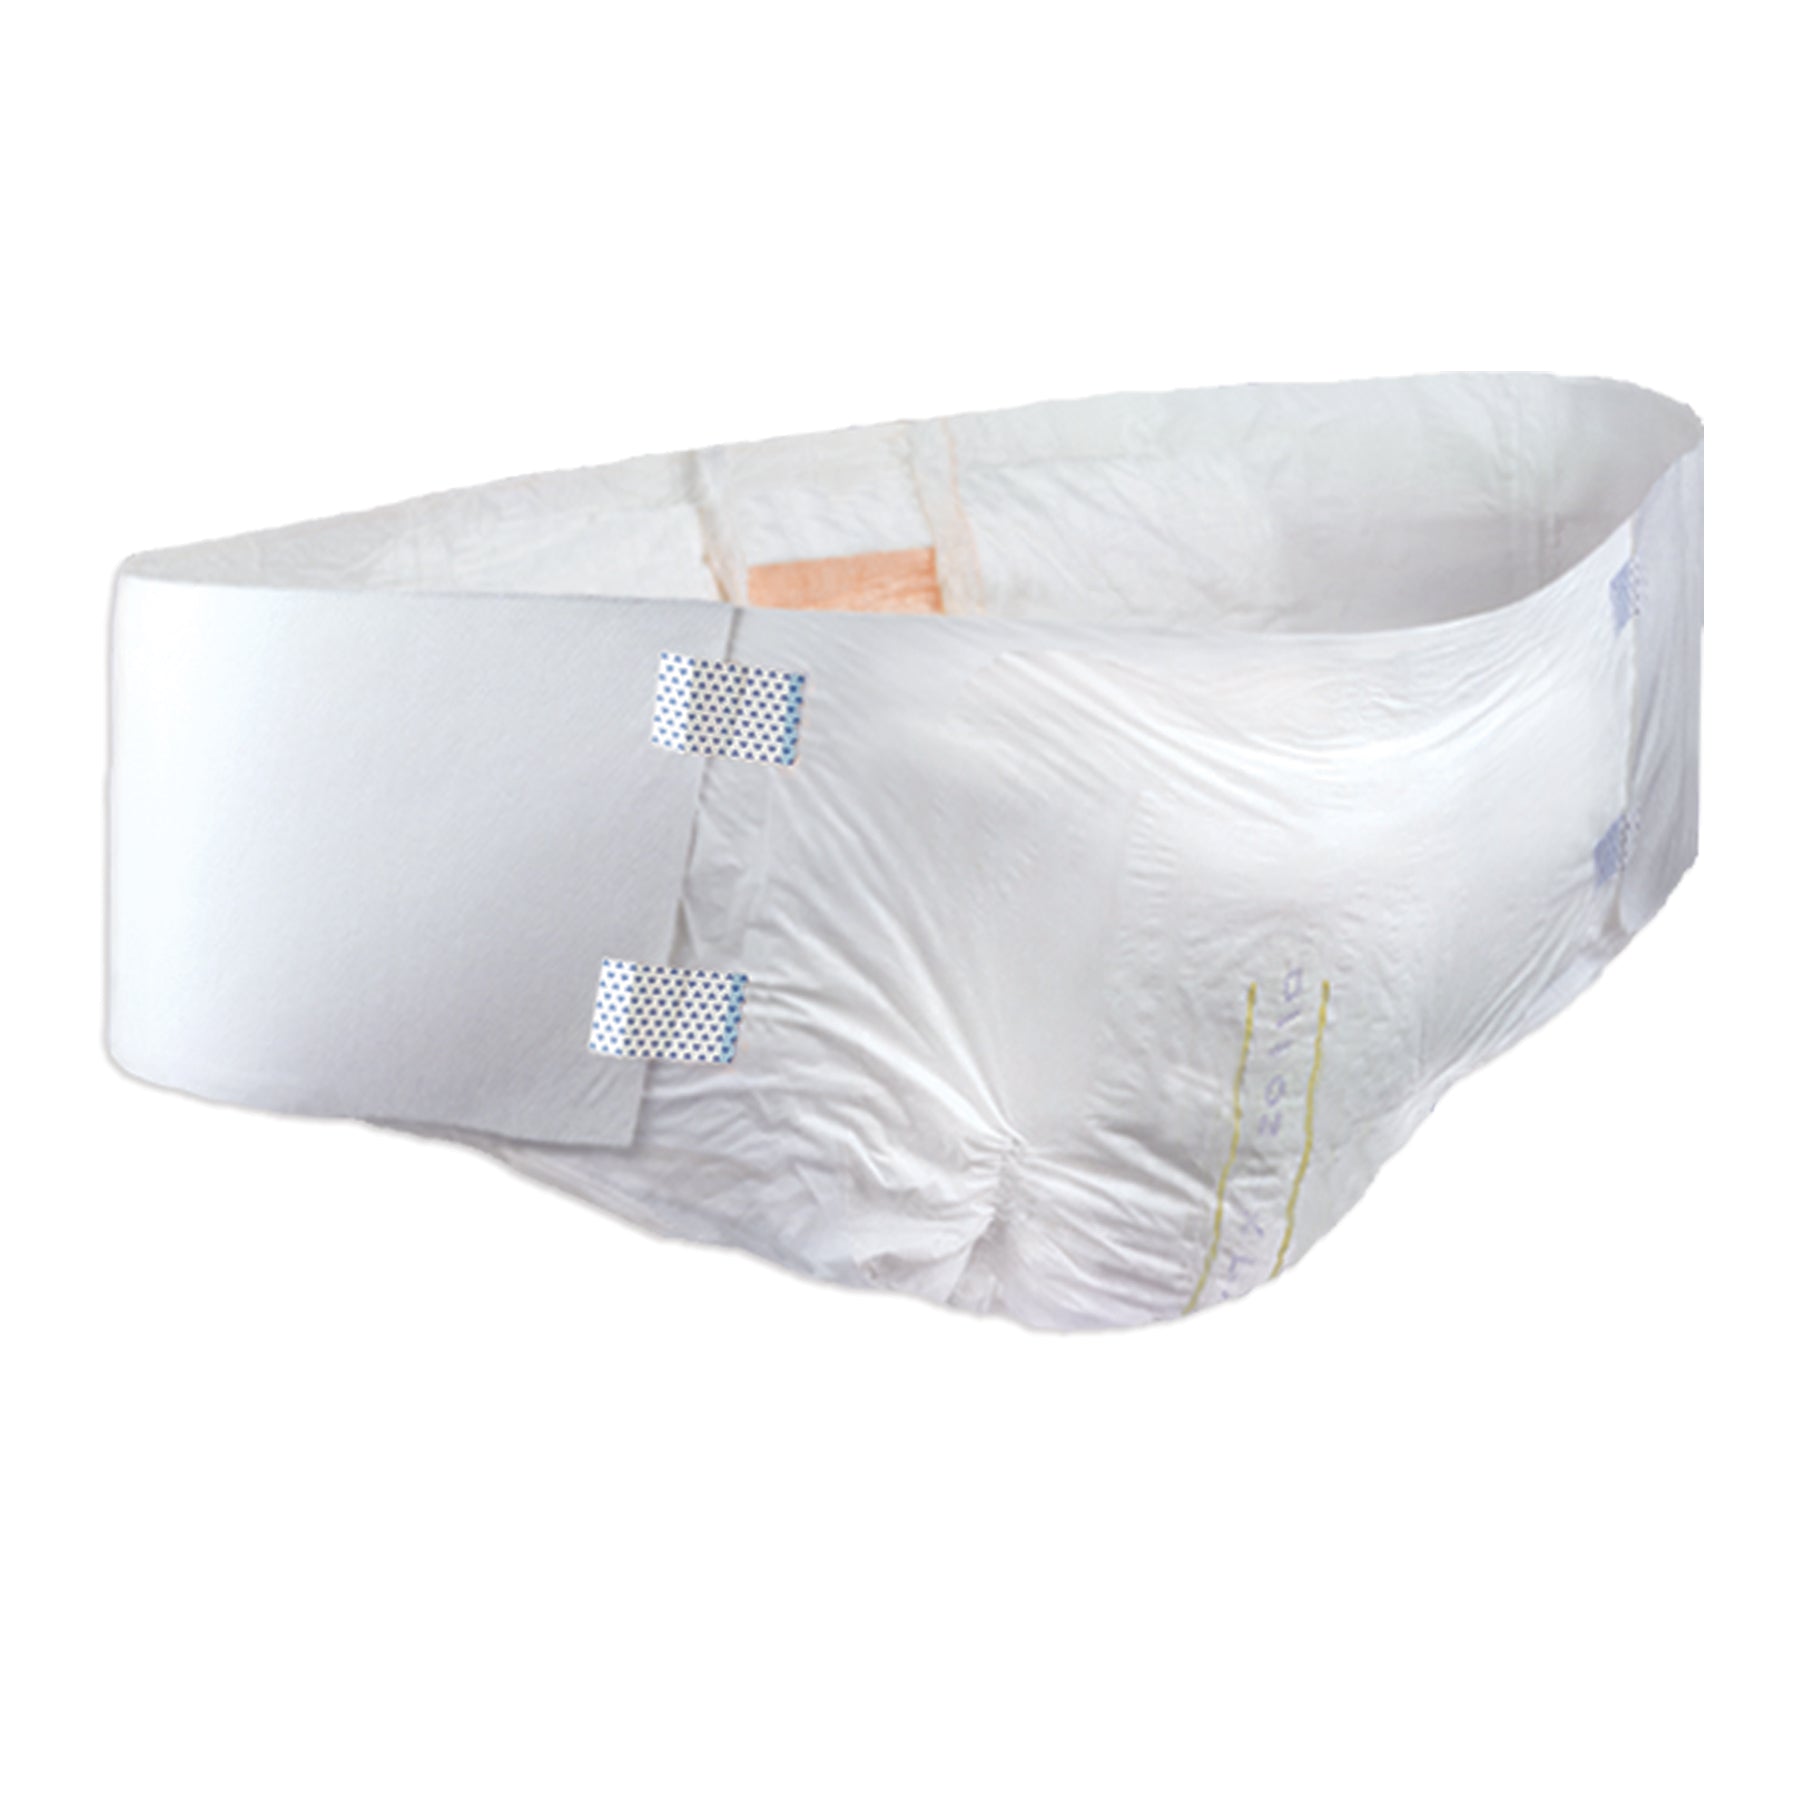 Tranquility XL+ Bariatric Disposable Brief - National Incontinence